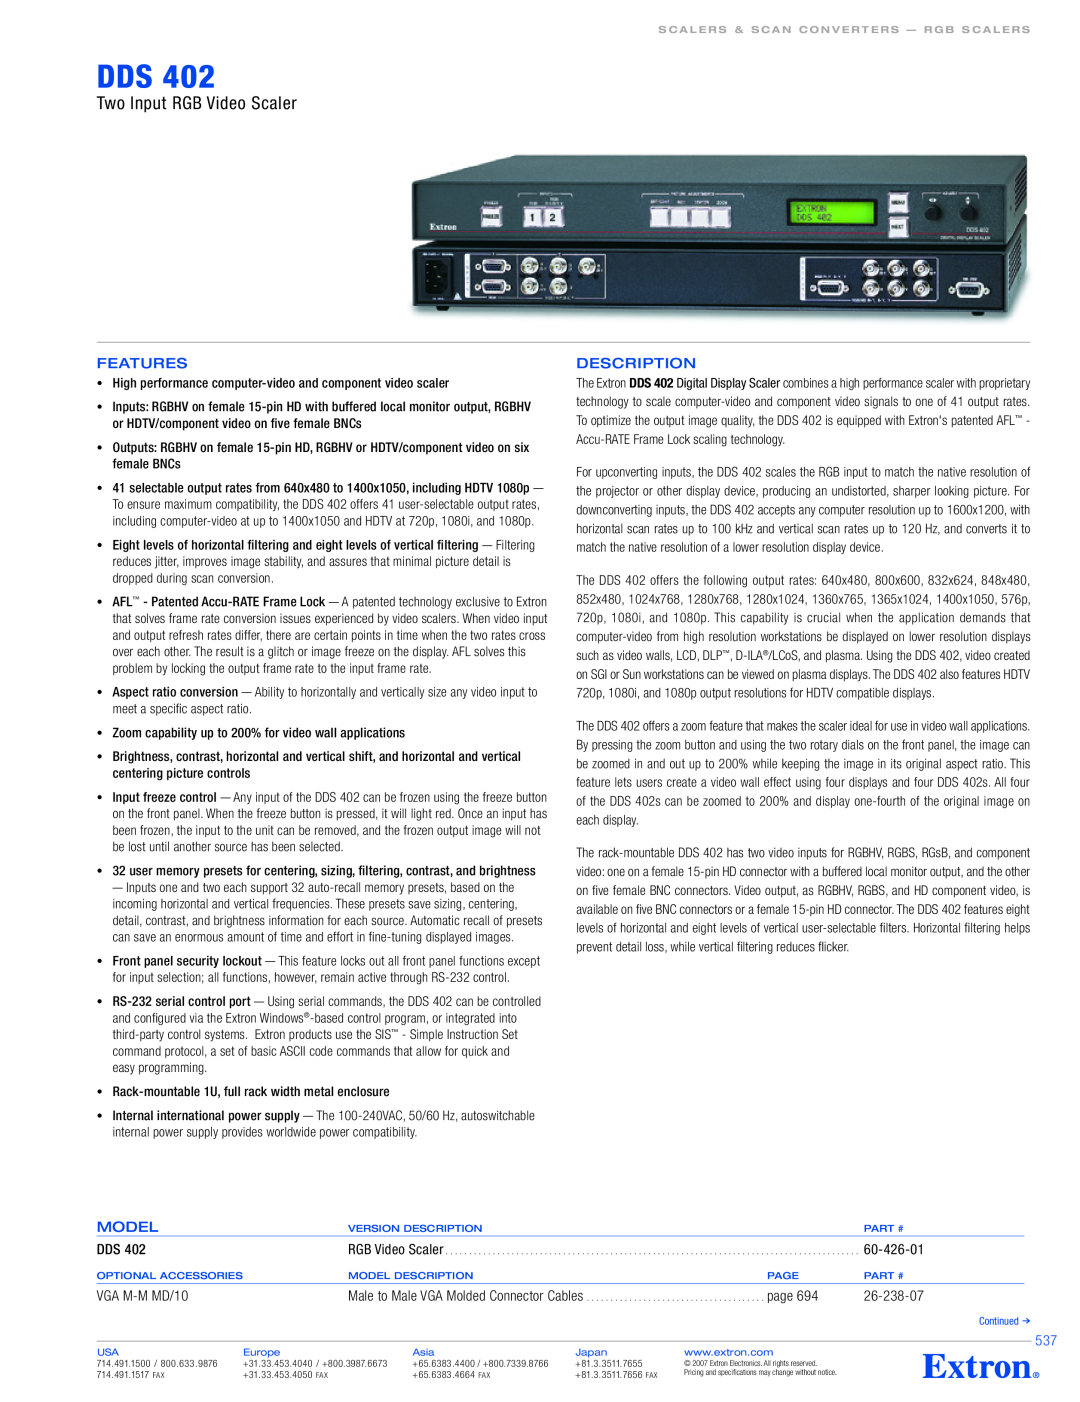 Extron electronic DDS 402 specifications Features, Description, Model, Two Input RGB Video Scaler, 60-426-01, page 